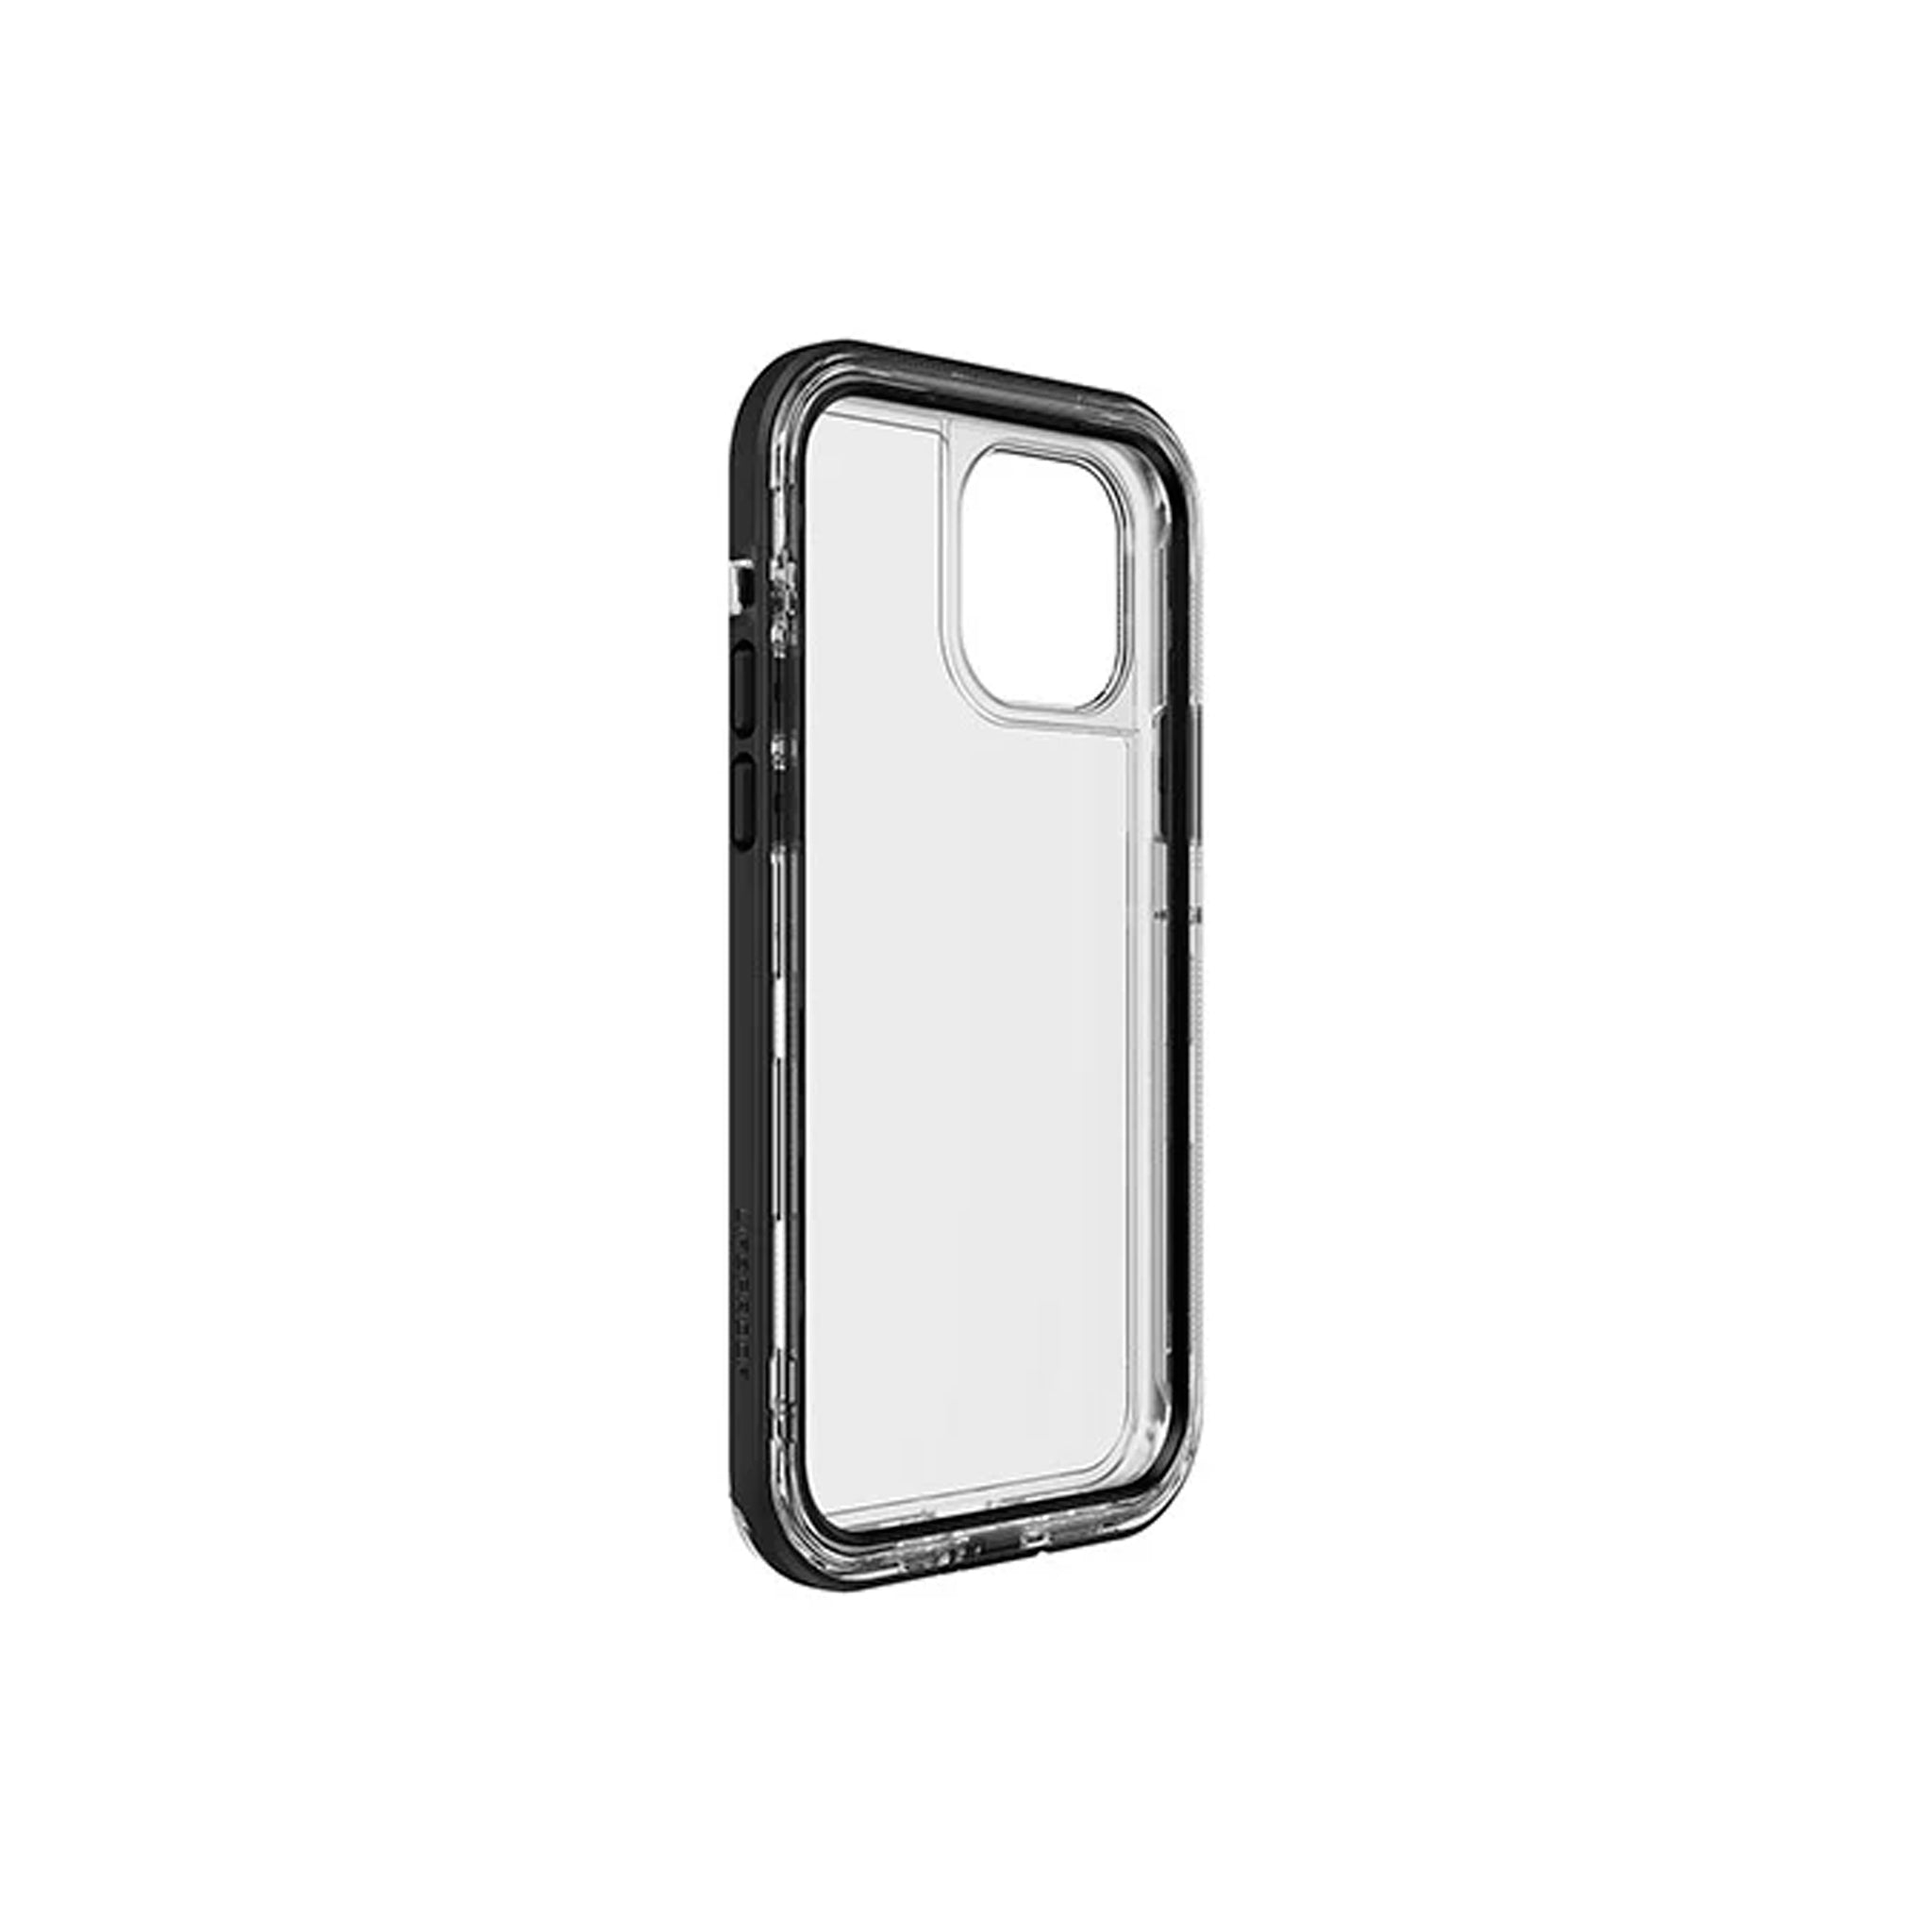 LifeProof - Next for iPhone 12 / 12 Pro - Black Crysral